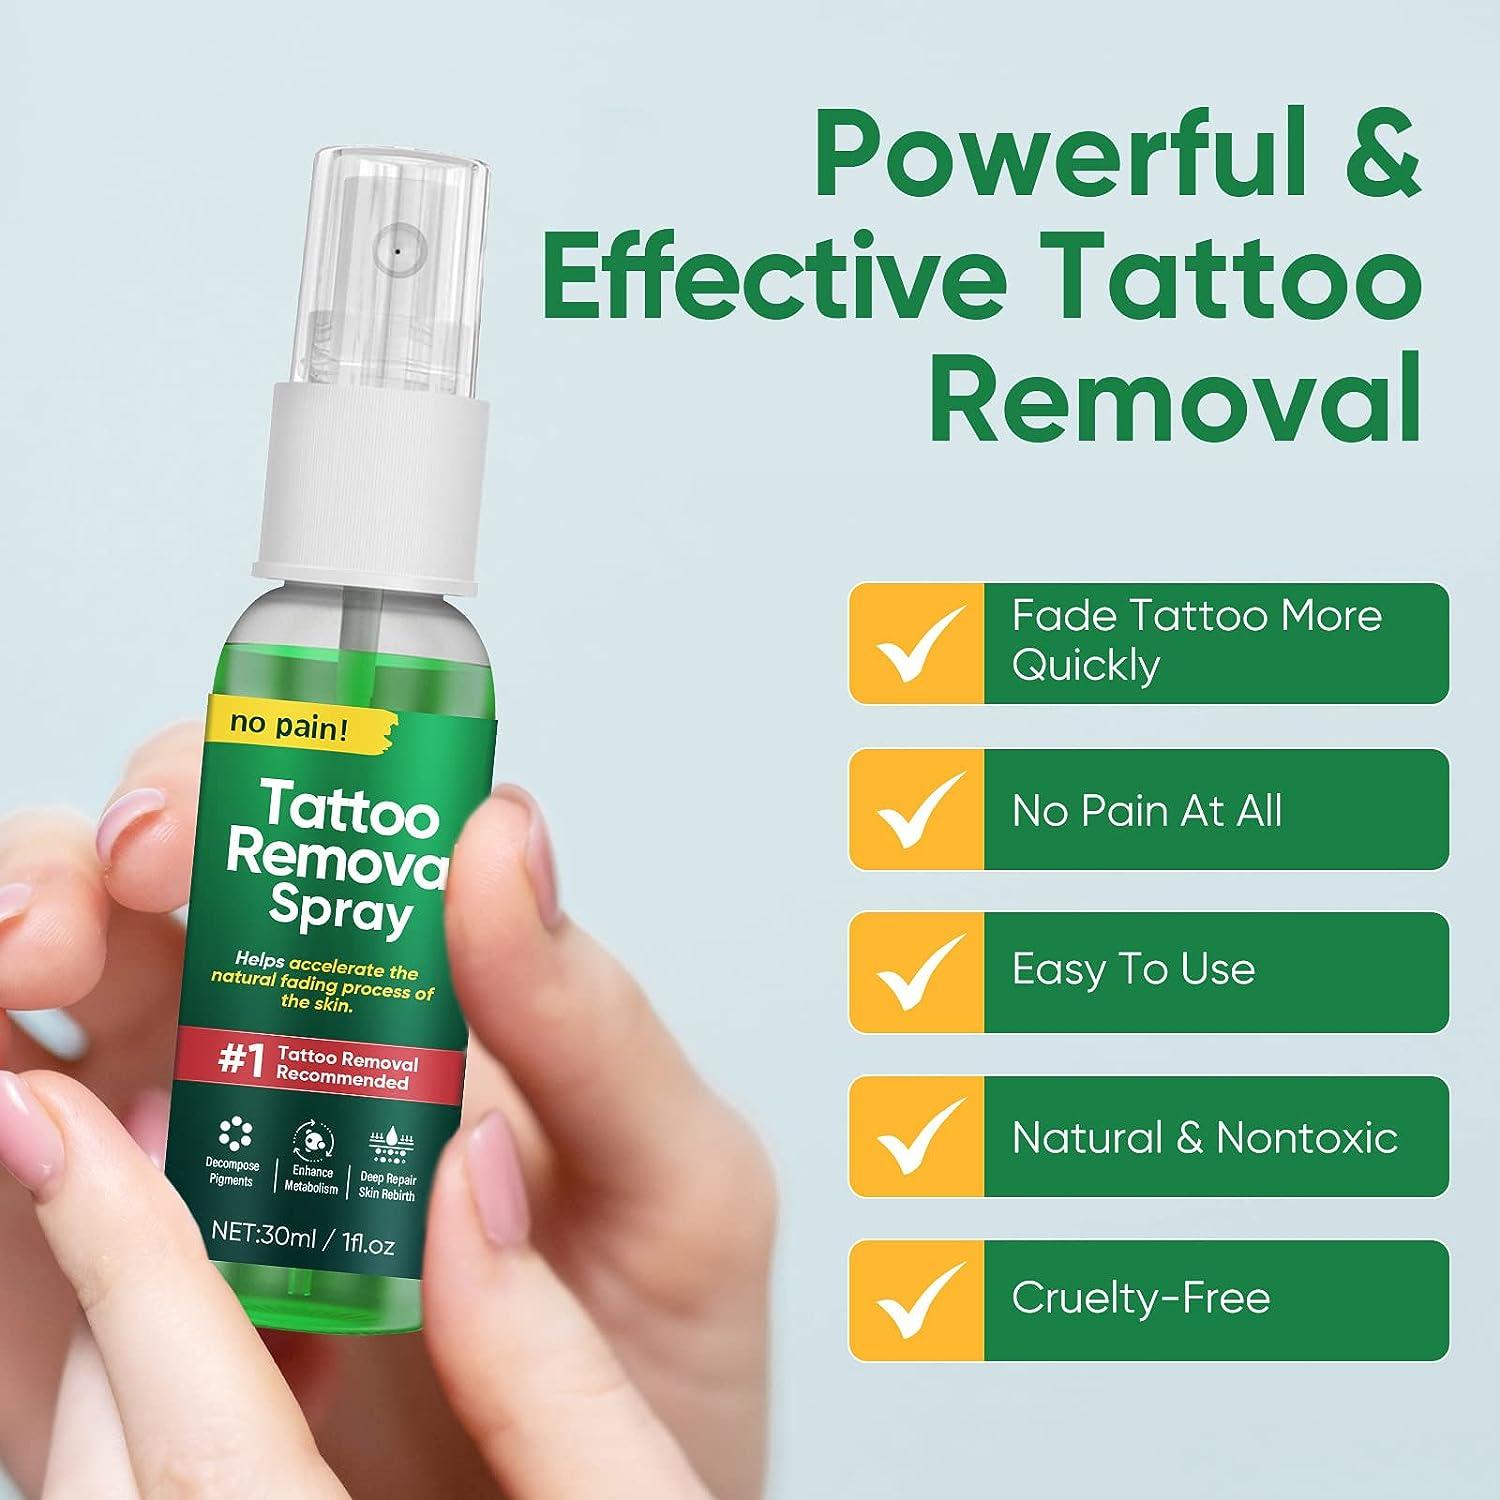 Alpha Tattoo Whip Aftercare – PainlessTattoo